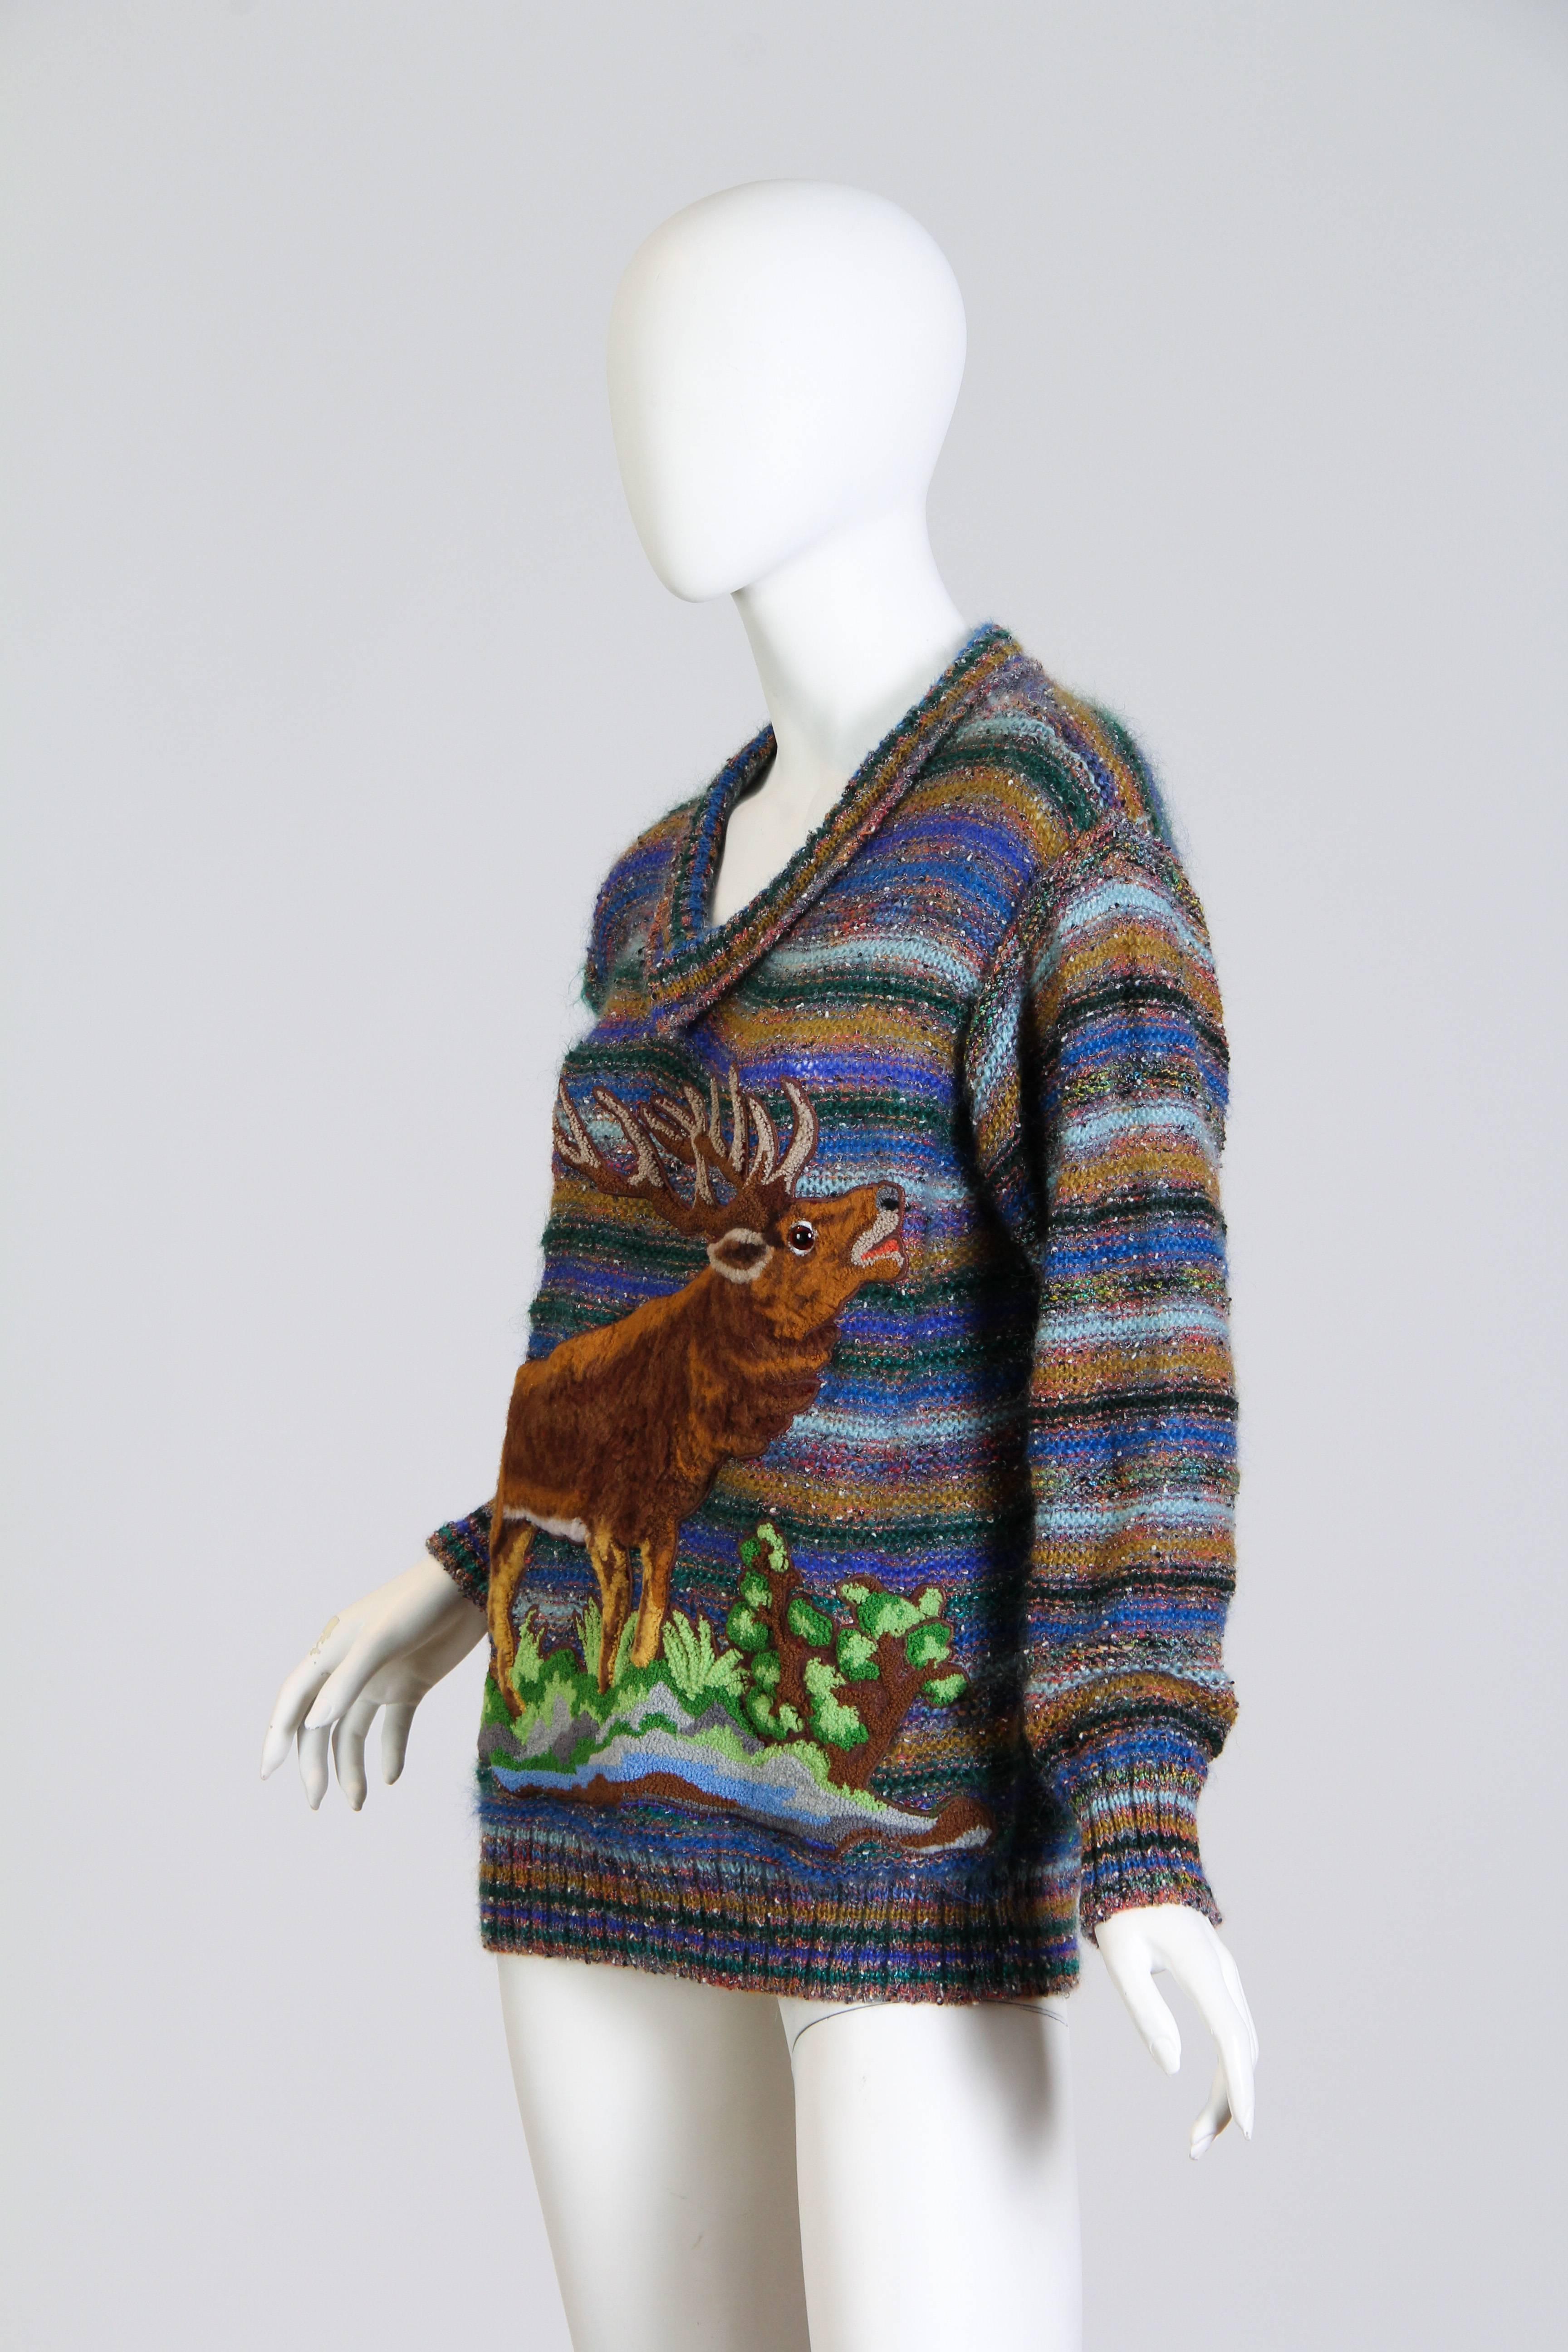 This is a classic knit sweater with a high-fashion twist. Missoni is known for the technical expertise they combine with their fun and often irreverent design sense, and this piece is no exception. The main motif is a majestic bugling elk: a playful